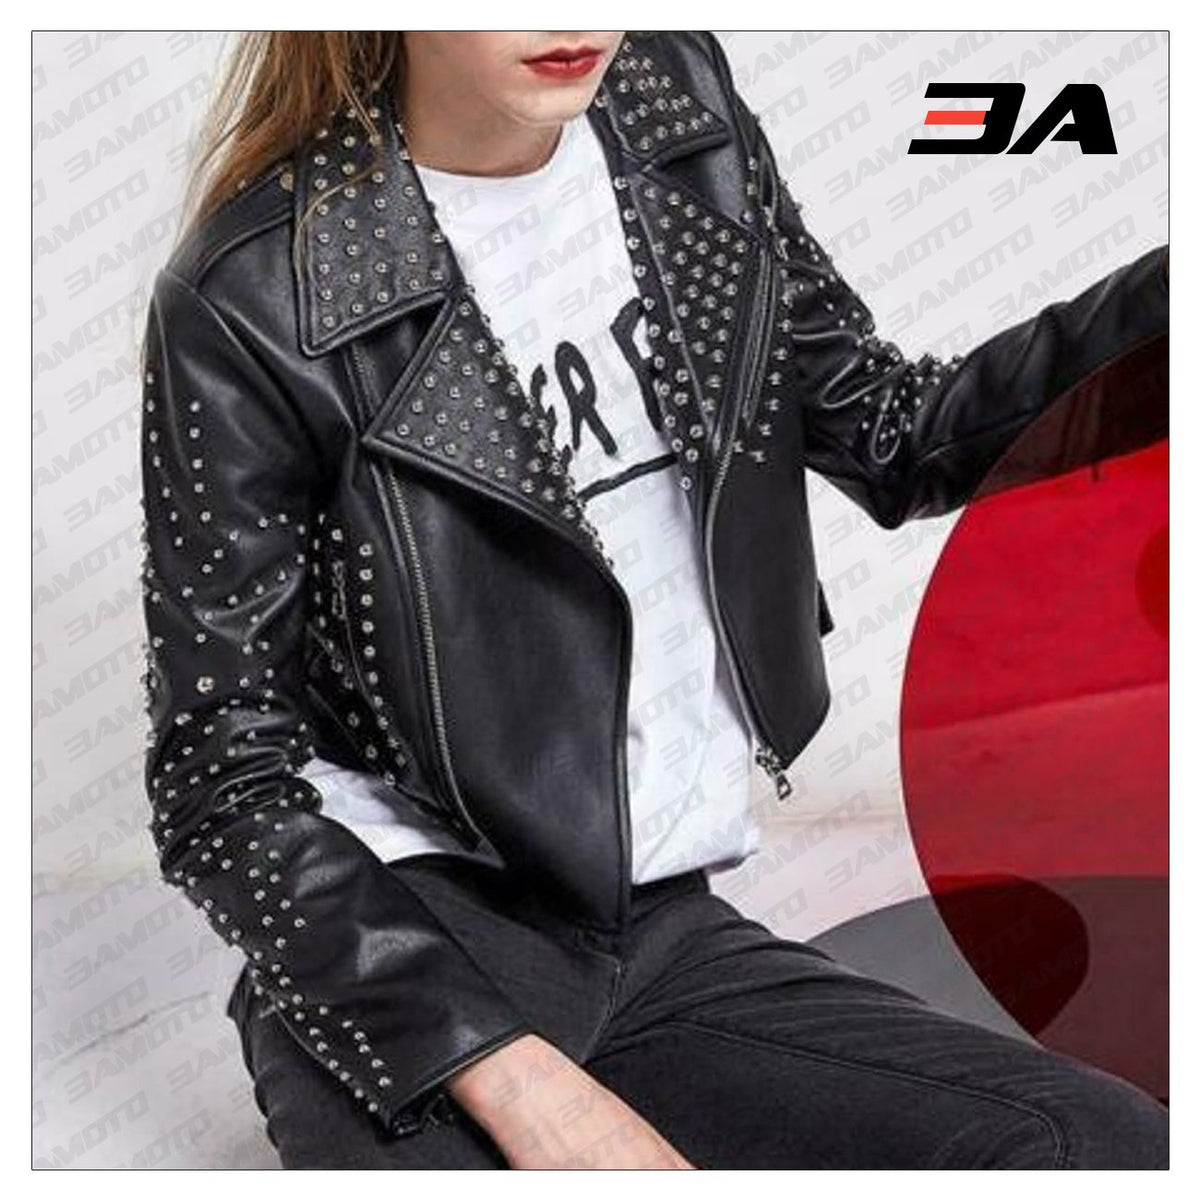 Full Rivet Leather Jacket Motobike Cool Punk Rock Graphic Patches